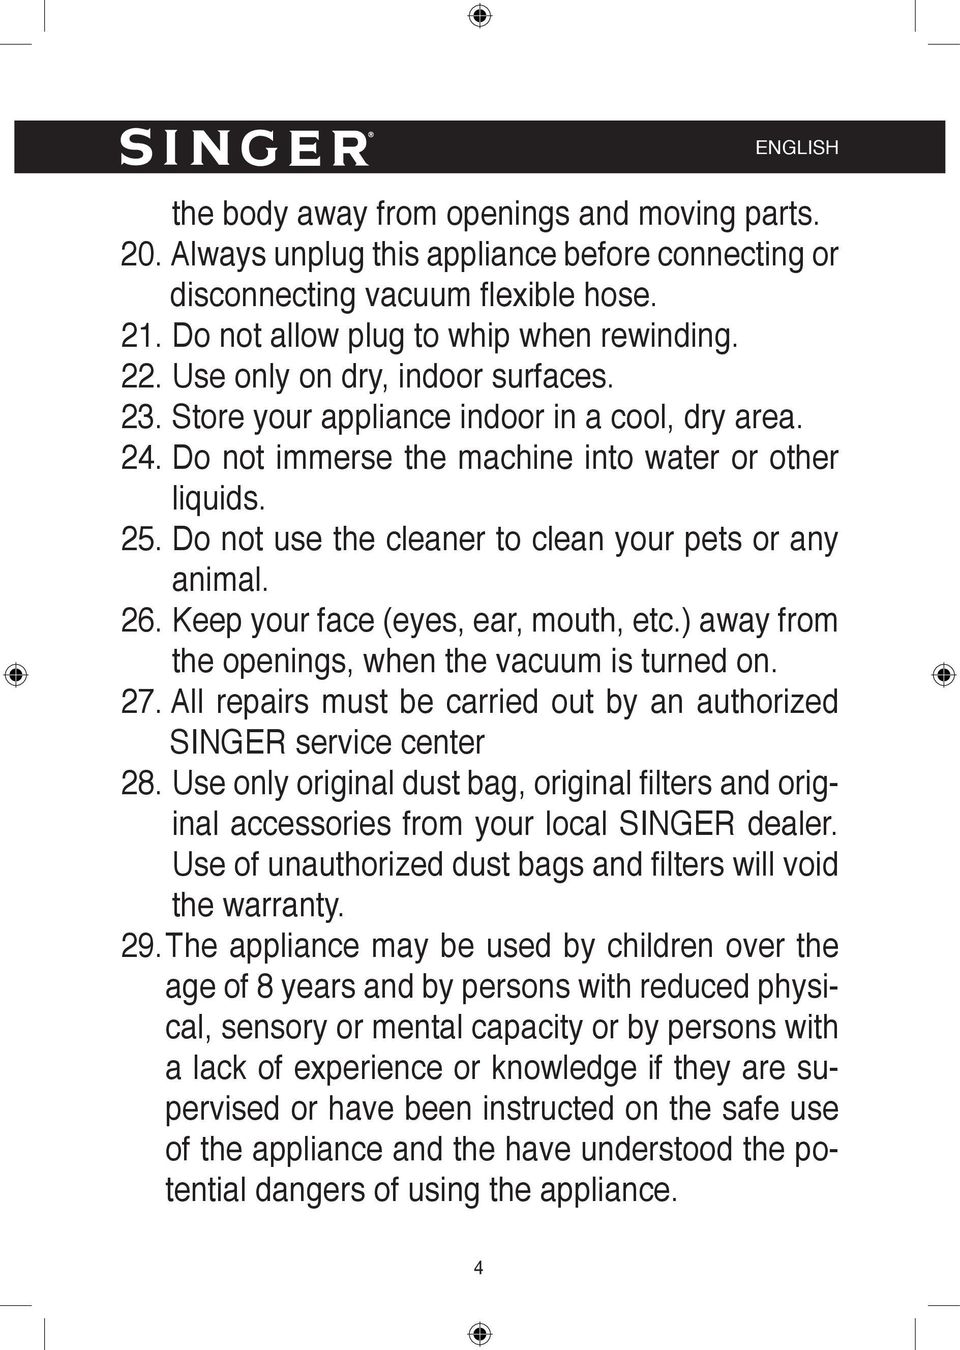 Do not use the cleaner to clean your pets or any animal. 26. Keep your face (eyes, ear, mouth, etc.) away from the openings, when the vacuum is turned on. 27.